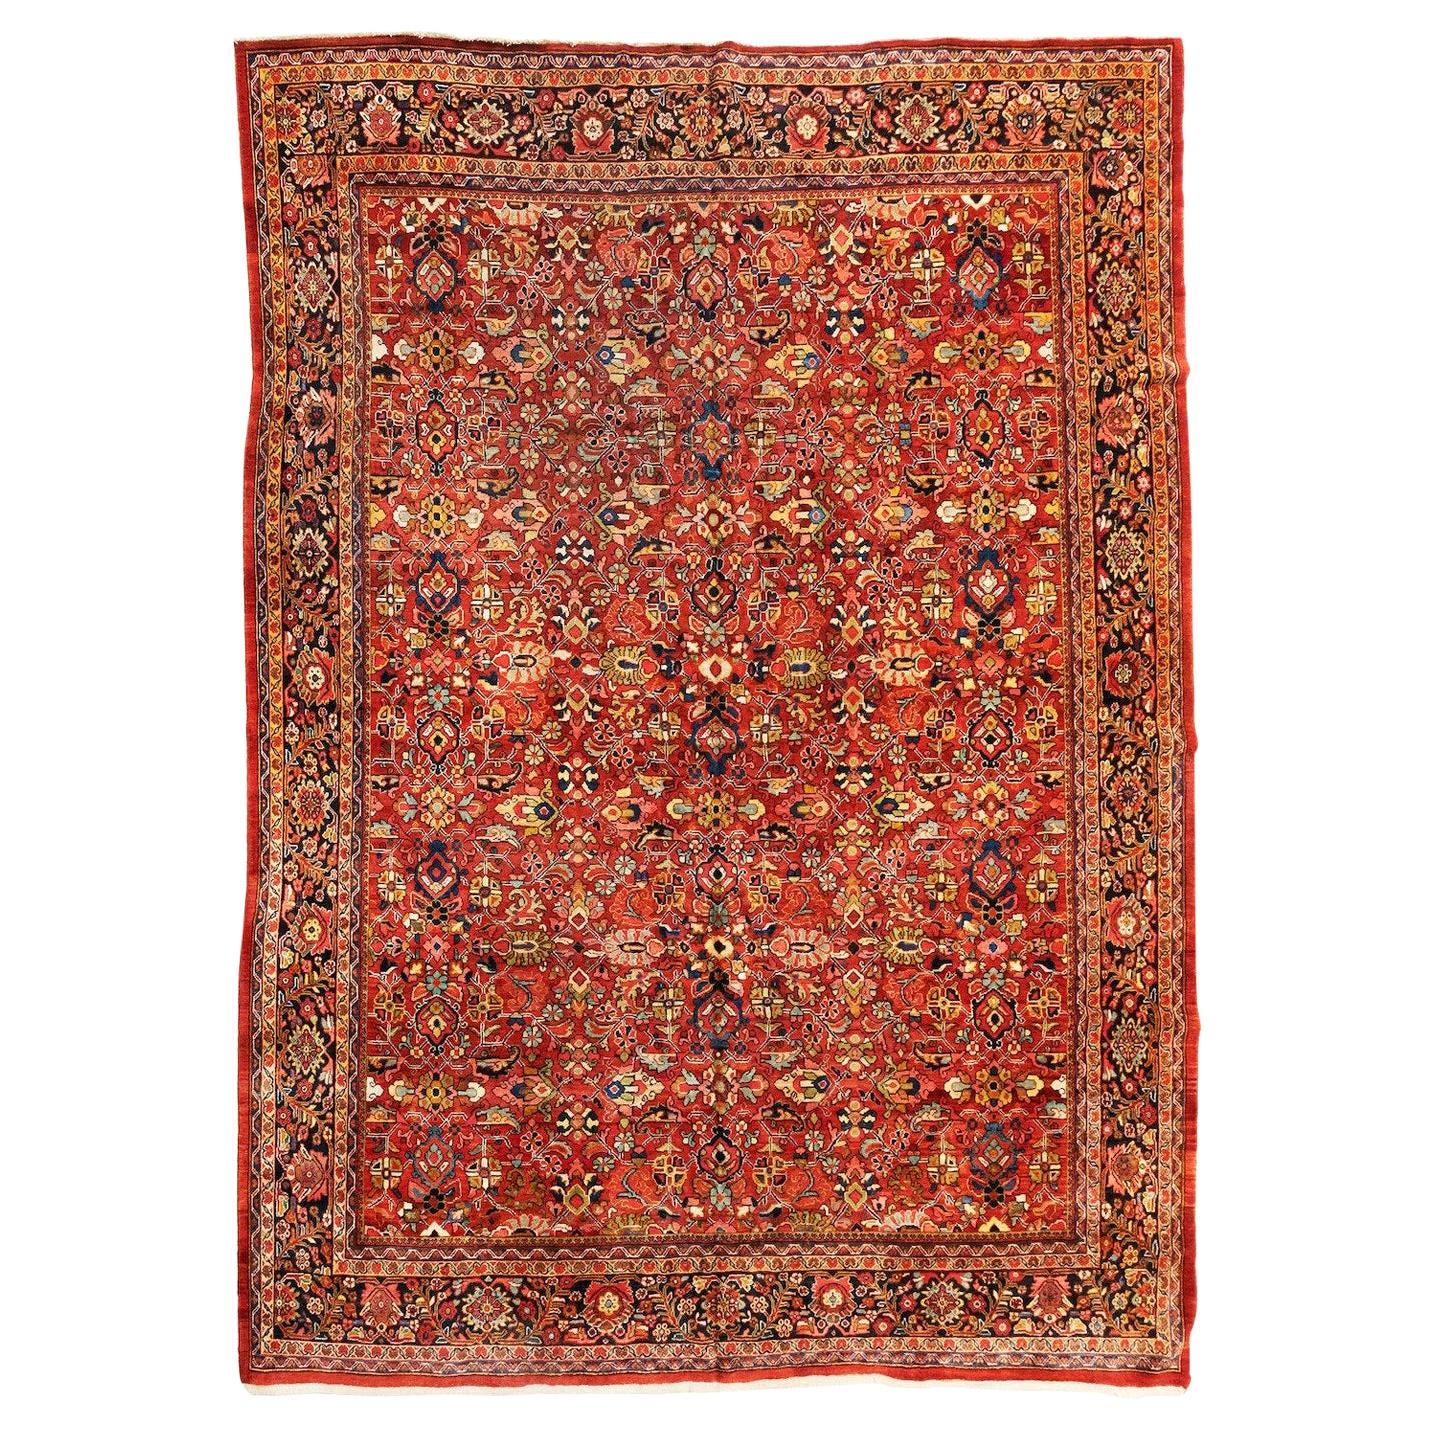 Oversize Antique Persian Red Gold Floral Mahal Ziegler Large Area Rug, c. 1930s